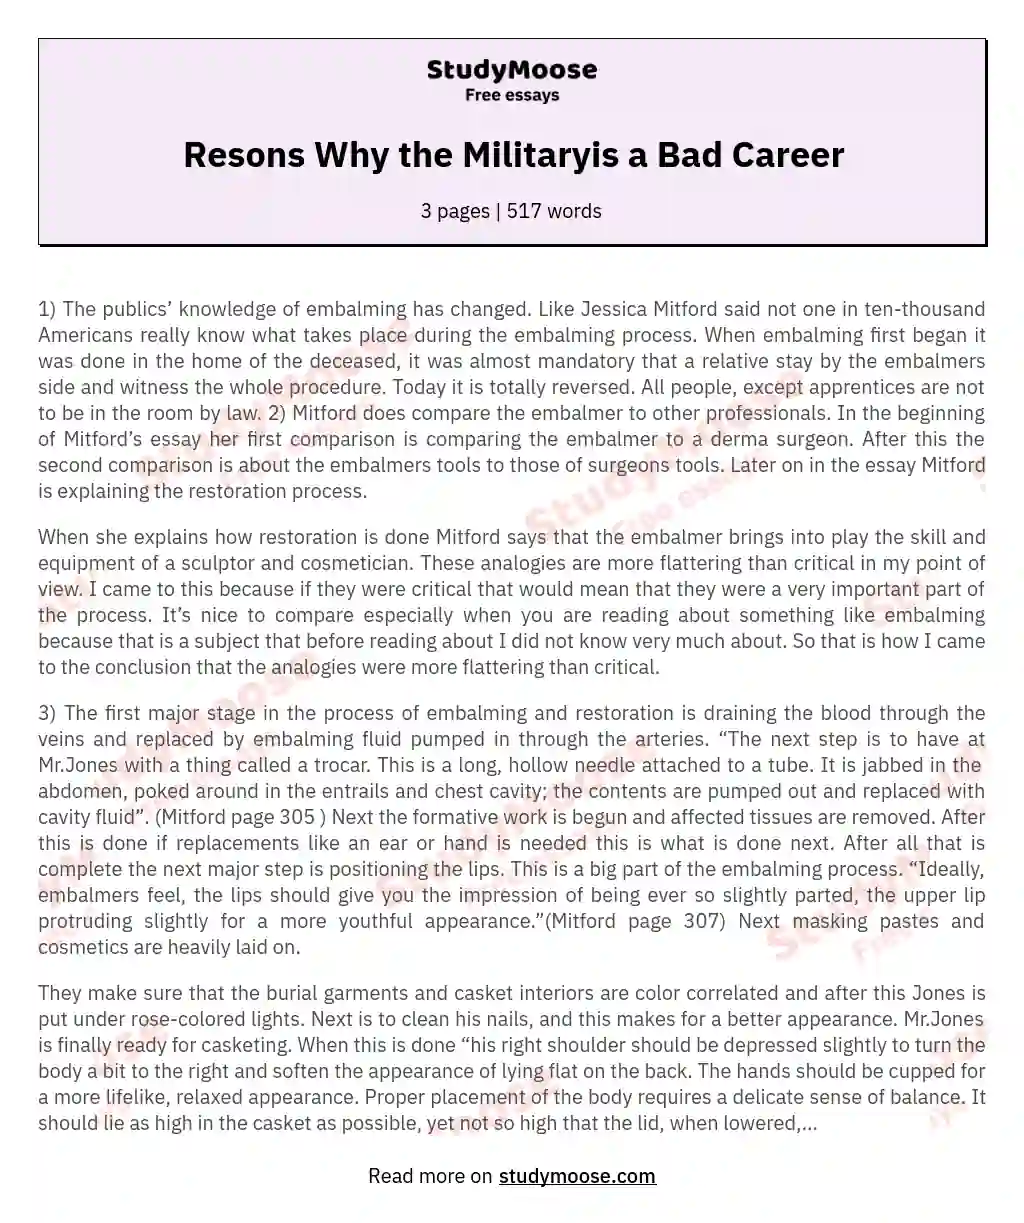 Resons Why the Militaryis a Bad Career